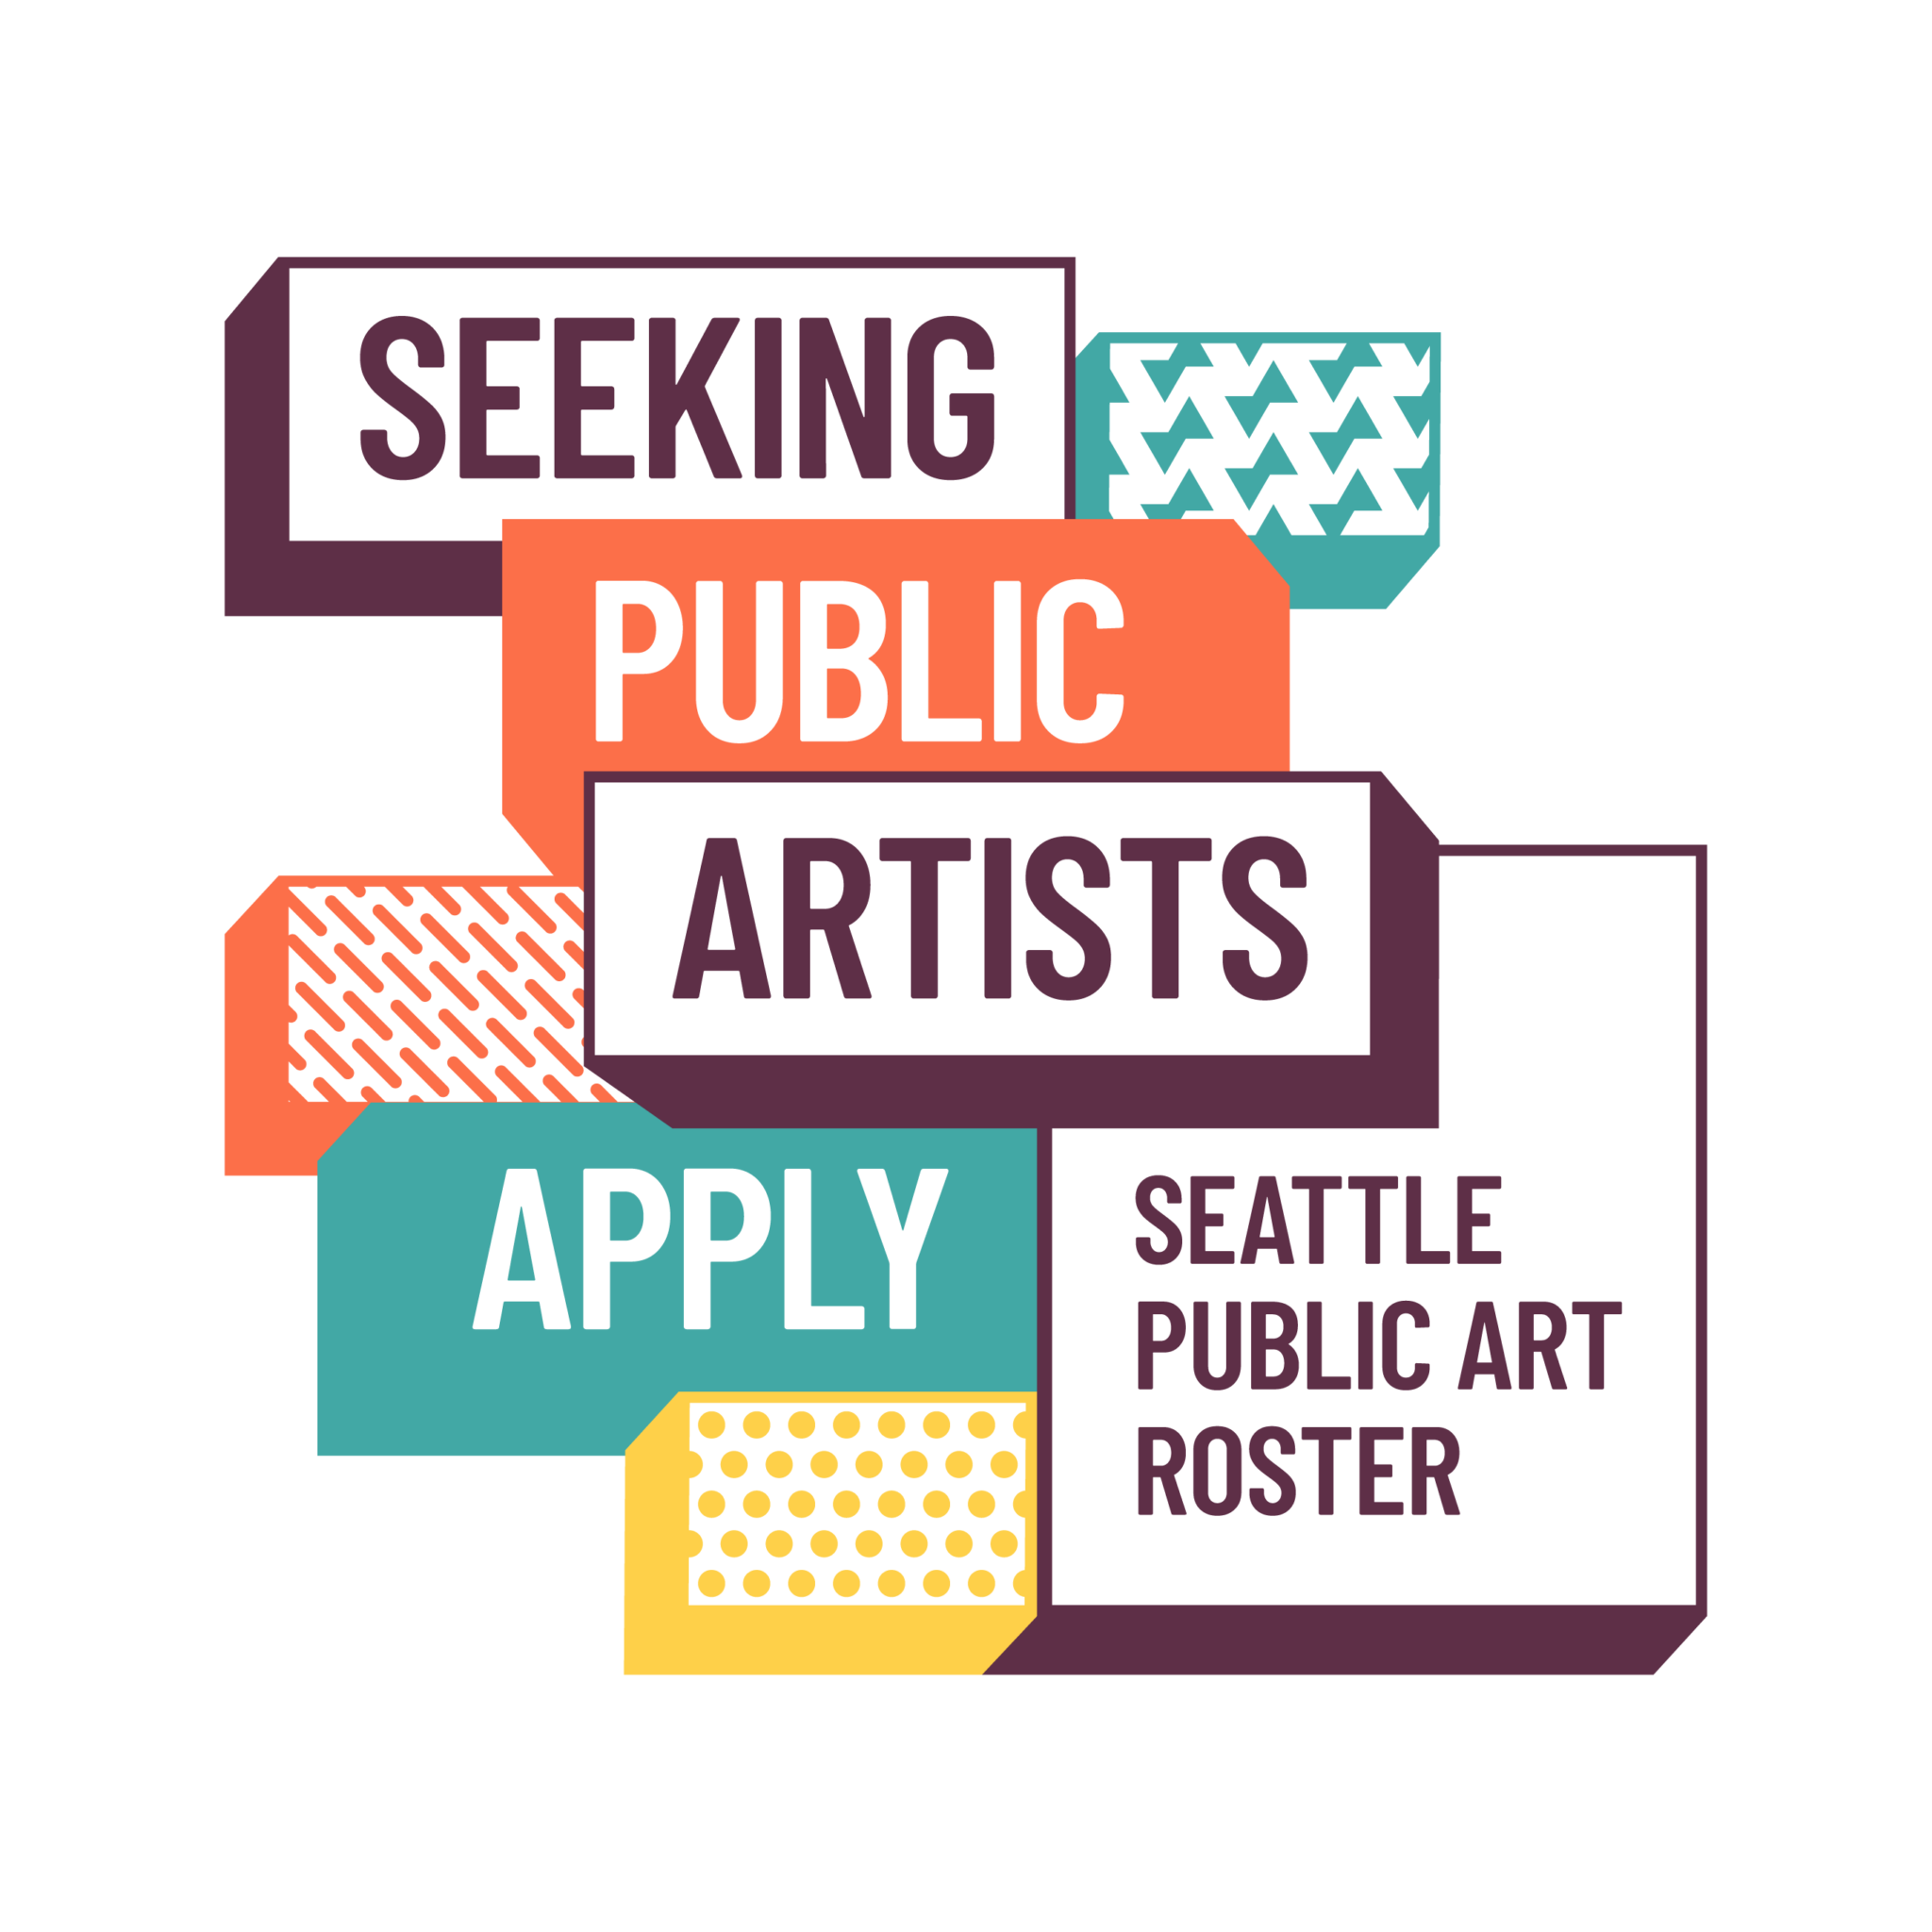 Colorful graphic reads: Seeking Public Artists - The text below reads: APPLY - Seattle Public Art Roster